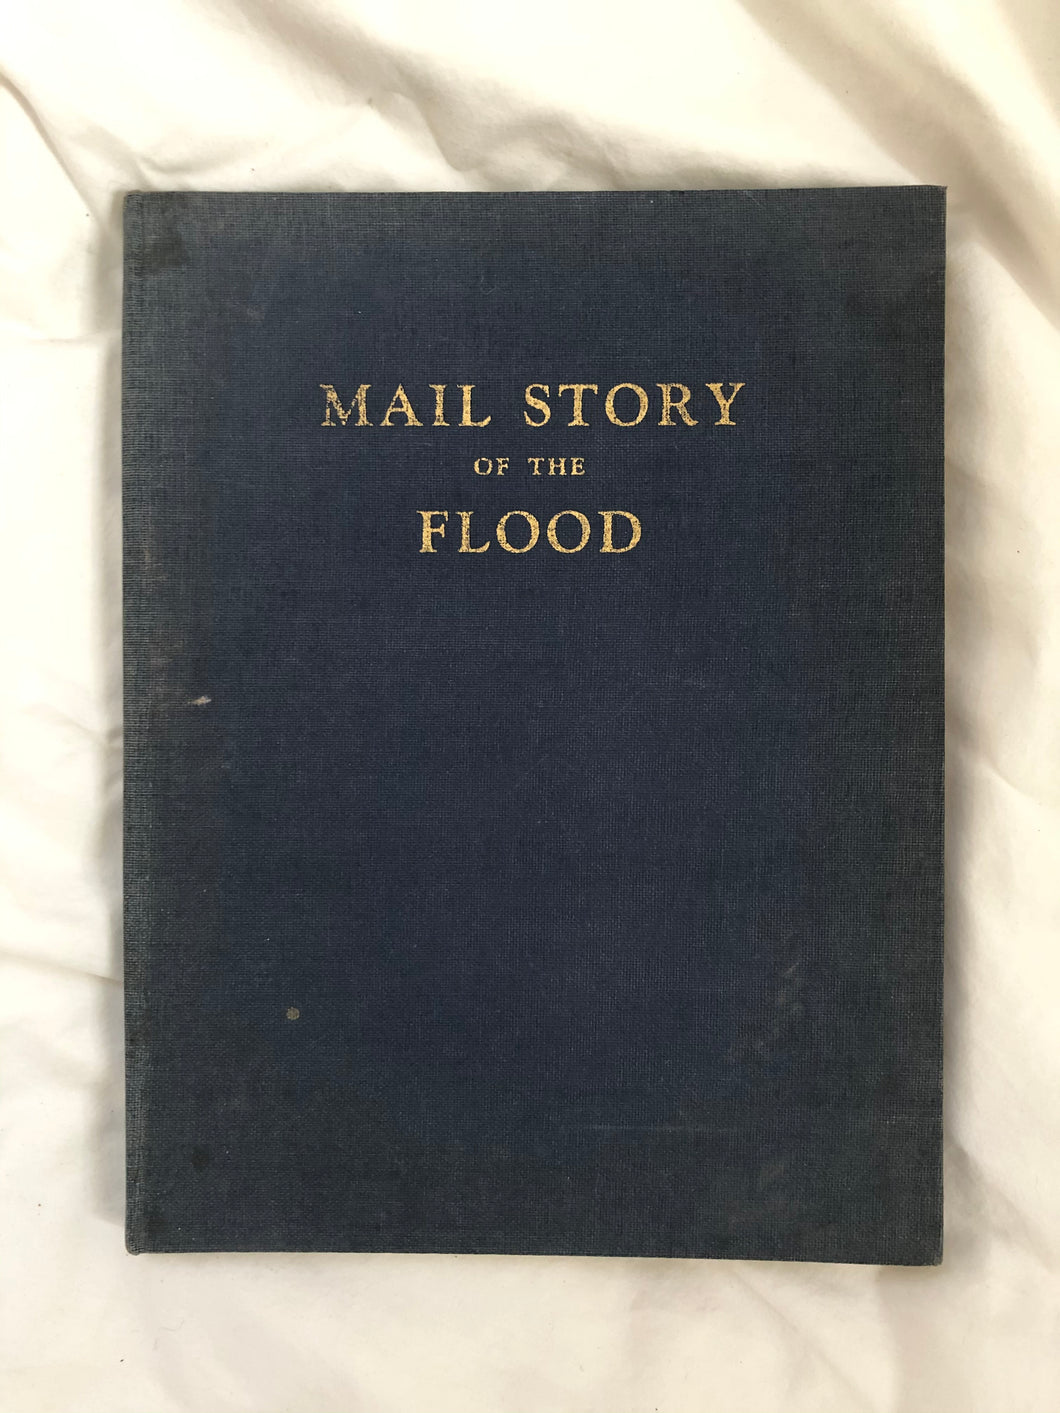 “Mail Story of the Flood”